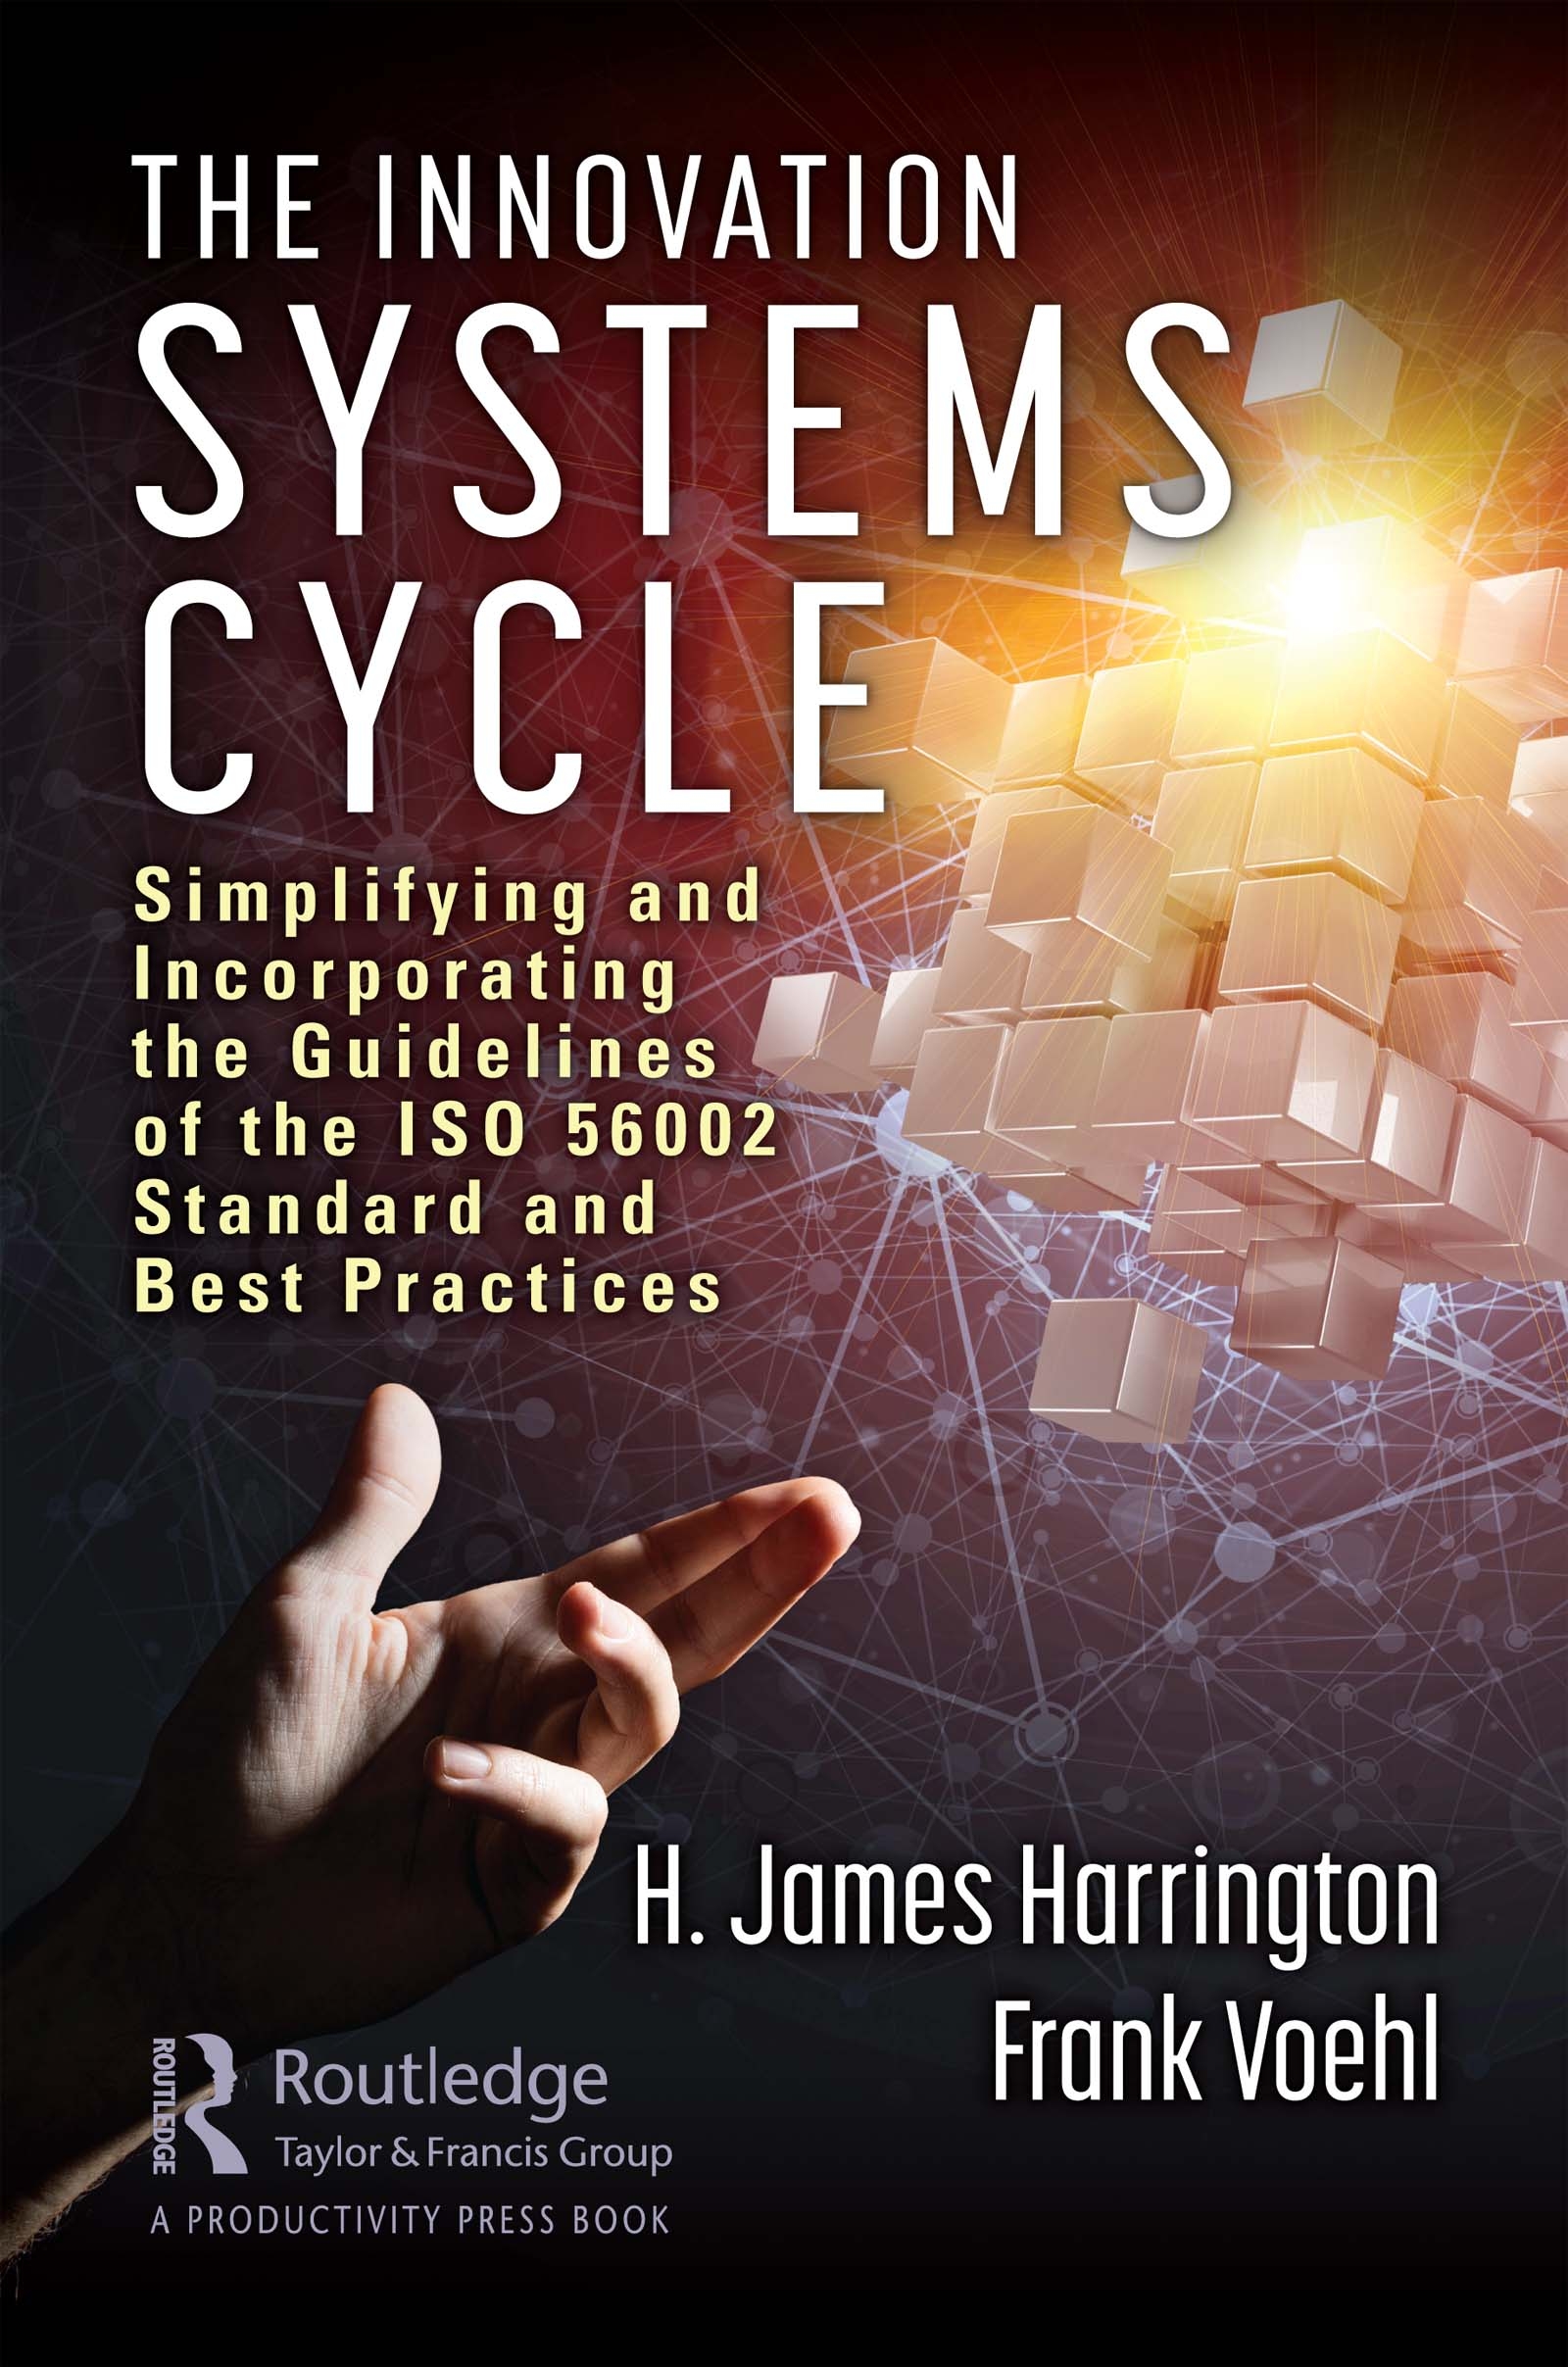 The Innovation Systems Cycle: Simplifying and Incorporating the Guidelines of the ISO 56002 Standard and Best Practices